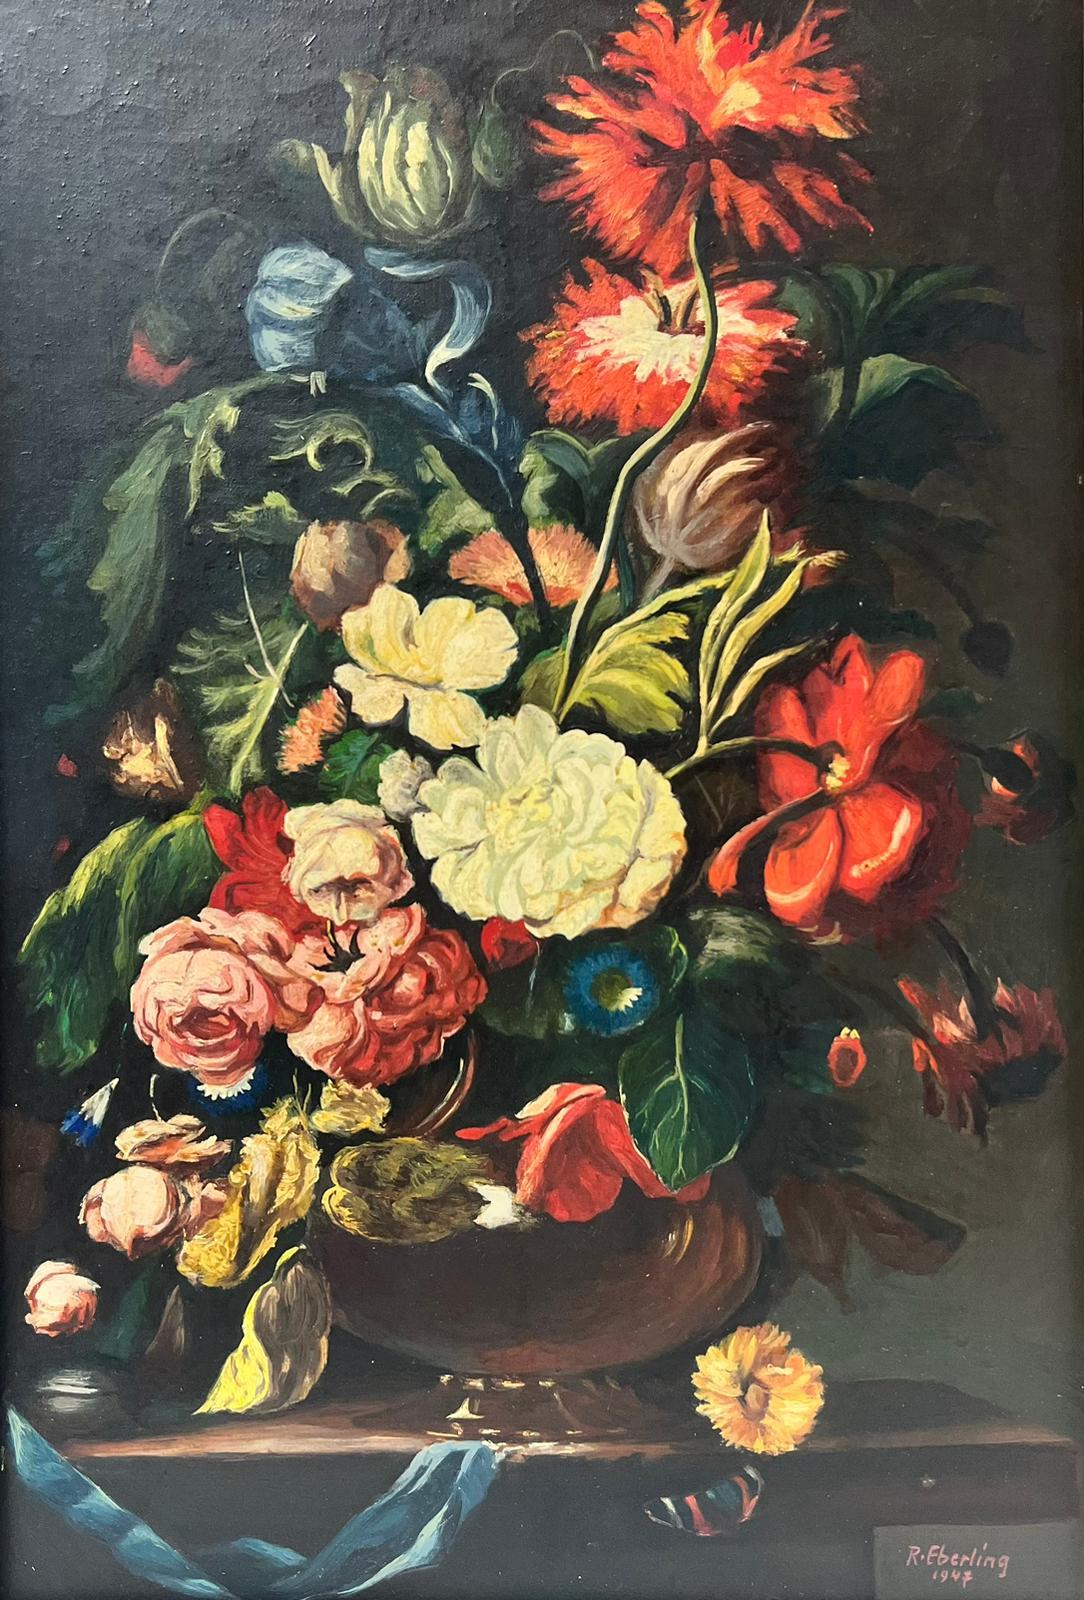 Classical Still Life Ornate Flowers in Vase in the Traditional Old Master style - Painting by French School